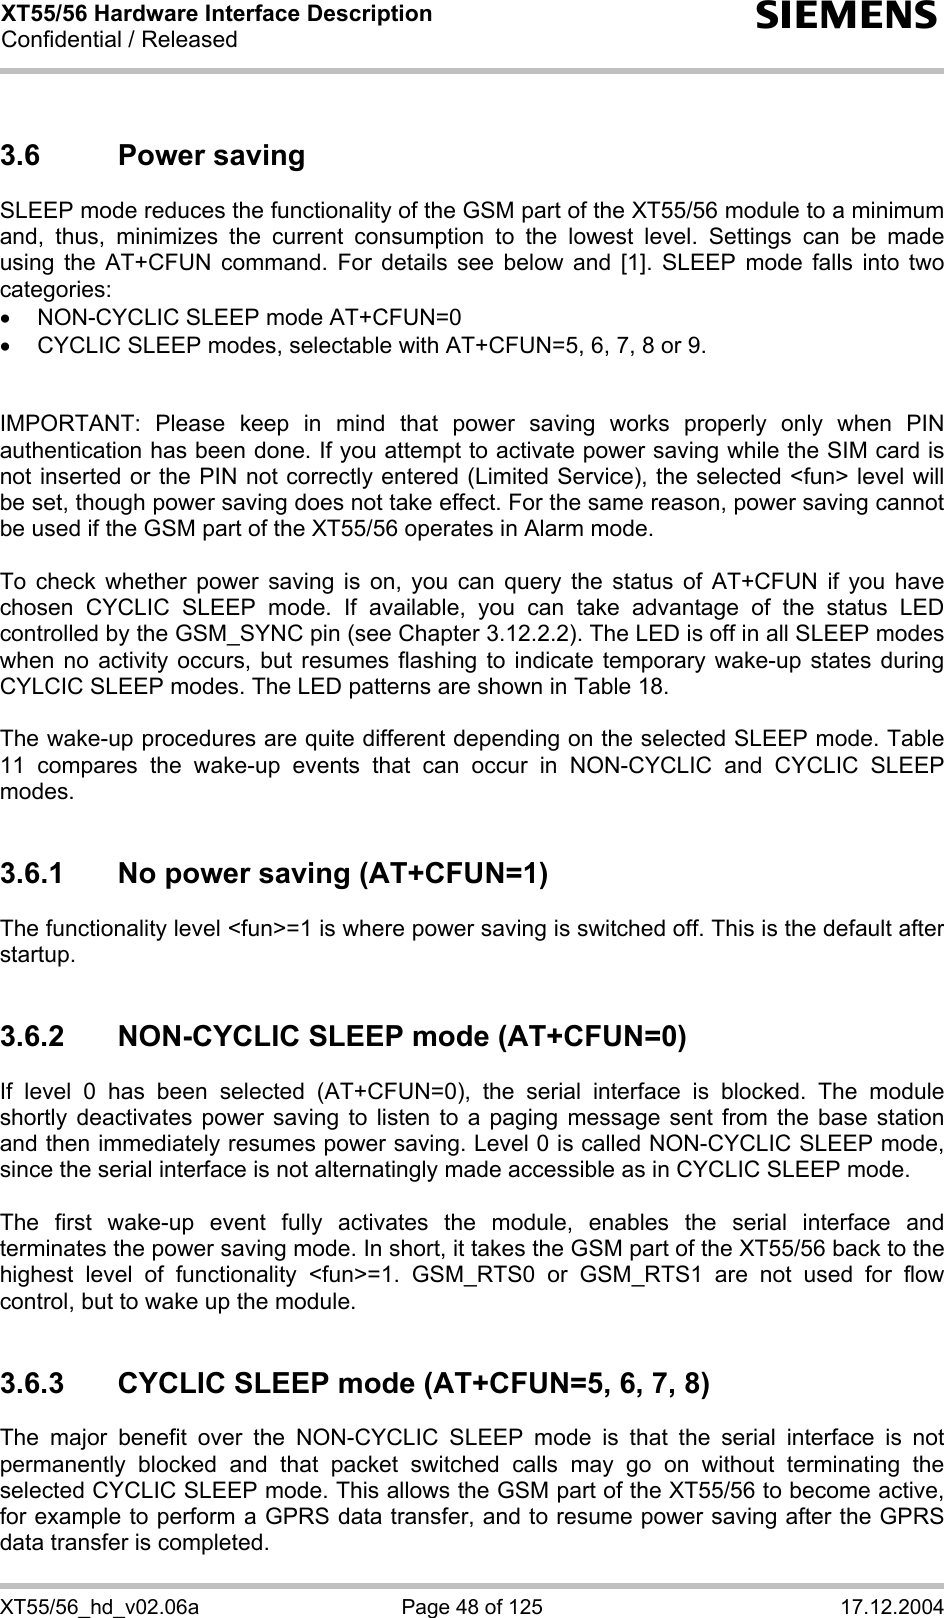 XT55/56 Hardware Interface Description Confidential / Released s XT55/56_hd_v02.06a  Page 48 of 125  17.12.2004 3.6 Power saving SLEEP mode reduces the functionality of the GSM part of the XT55/56 module to a minimum and, thus, minimizes the current consumption to the lowest level. Settings can be made using the AT+CFUN command. For details see below and [1]. SLEEP mode falls into two categories: •  NON-CYCLIC SLEEP mode AT+CFUN=0 •  CYCLIC SLEEP modes, selectable with AT+CFUN=5, 6, 7, 8 or 9.   IMPORTANT: Please keep in mind that power saving works properly only when PIN authentication has been done. If you attempt to activate power saving while the SIM card is not inserted or the PIN not correctly entered (Limited Service), the selected &lt;fun&gt; level will be set, though power saving does not take effect. For the same reason, power saving cannot be used if the GSM part of the XT55/56 operates in Alarm mode.  To check whether power saving is on, you can query the status of AT+CFUN if you have chosen CYCLIC SLEEP mode. If available, you can take advantage of the status LED controlled by the GSM_SYNC pin (see Chapter 3.12.2.2). The LED is off in all SLEEP modes when no activity occurs, but resumes flashing to indicate temporary wake-up states during CYLCIC SLEEP modes. The LED patterns are shown in Table 18.   The wake-up procedures are quite different depending on the selected SLEEP mode. Table 11 compares the wake-up events that can occur in NON-CYCLIC and CYCLIC SLEEP modes.  3.6.1  No power saving (AT+CFUN=1) The functionality level &lt;fun&gt;=1 is where power saving is switched off. This is the default after startup.   3.6.2  NON-CYCLIC SLEEP mode (AT+CFUN=0) If level 0 has been selected (AT+CFUN=0), the serial interface is blocked. The module shortly deactivates power saving to listen to a paging message sent from the base station and then immediately resumes power saving. Level 0 is called NON-CYCLIC SLEEP mode, since the serial interface is not alternatingly made accessible as in CYCLIC SLEEP mode.  The first wake-up event fully activates the module, enables the serial interface and terminates the power saving mode. In short, it takes the GSM part of the XT55/56 back to the highest level of functionality &lt;fun&gt;=1. GSM_RTS0 or GSM_RTS1 are not used for flow control, but to wake up the module.  3.6.3  CYCLIC SLEEP mode (AT+CFUN=5, 6, 7, 8) The major benefit over the NON-CYCLIC SLEEP mode is that the serial interface is not permanently blocked and that packet switched calls may go on without terminating the selected CYCLIC SLEEP mode. This allows the GSM part of the XT55/56 to become active, for example to perform a GPRS data transfer, and to resume power saving after the GPRS data transfer is completed. 